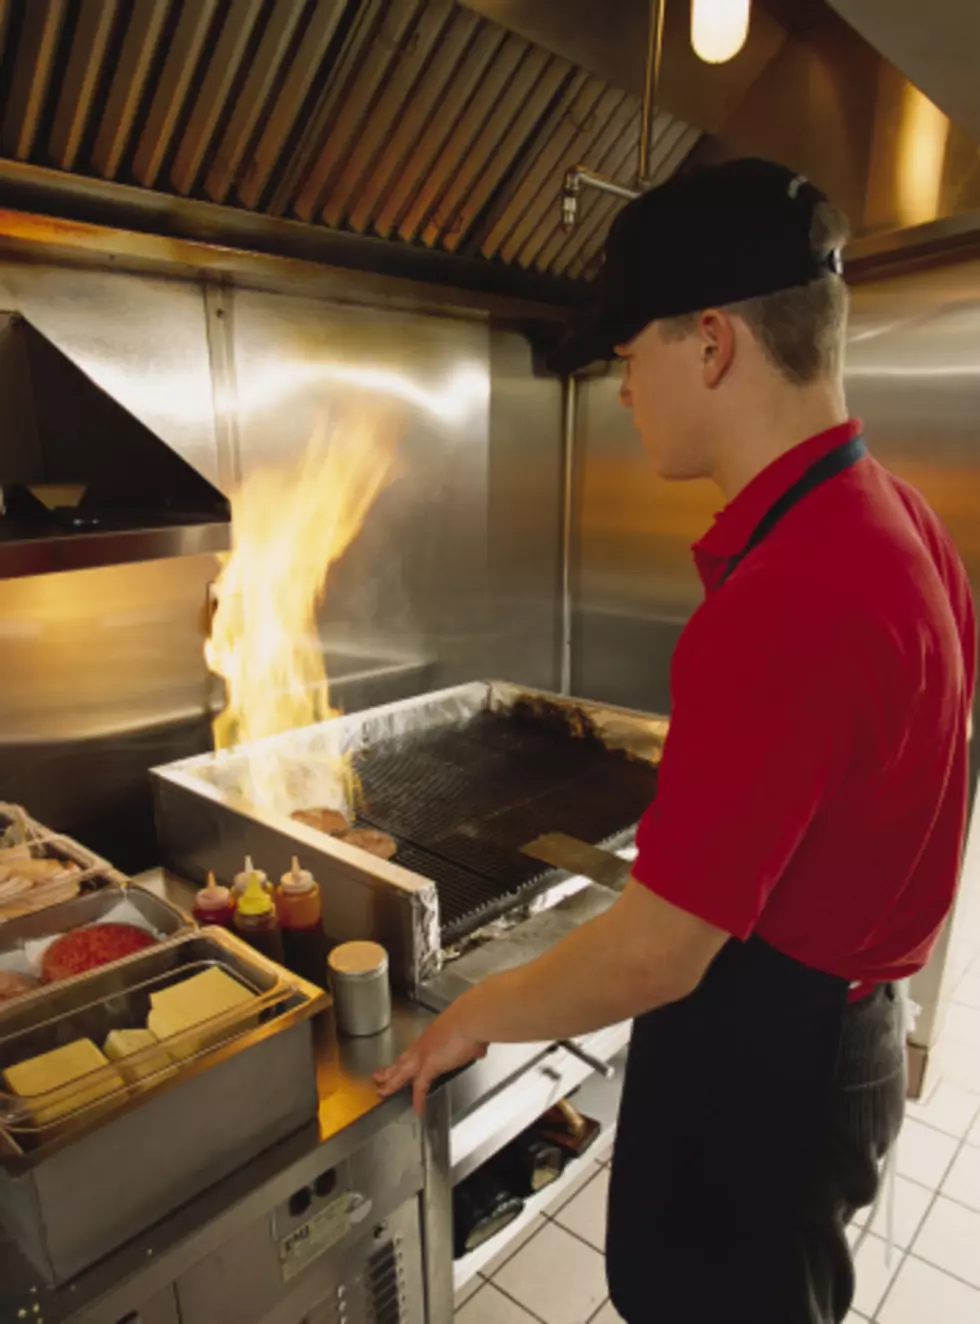 Six Things You Should Avoid at Fast Food Restaurant, According to Fast Food Employees